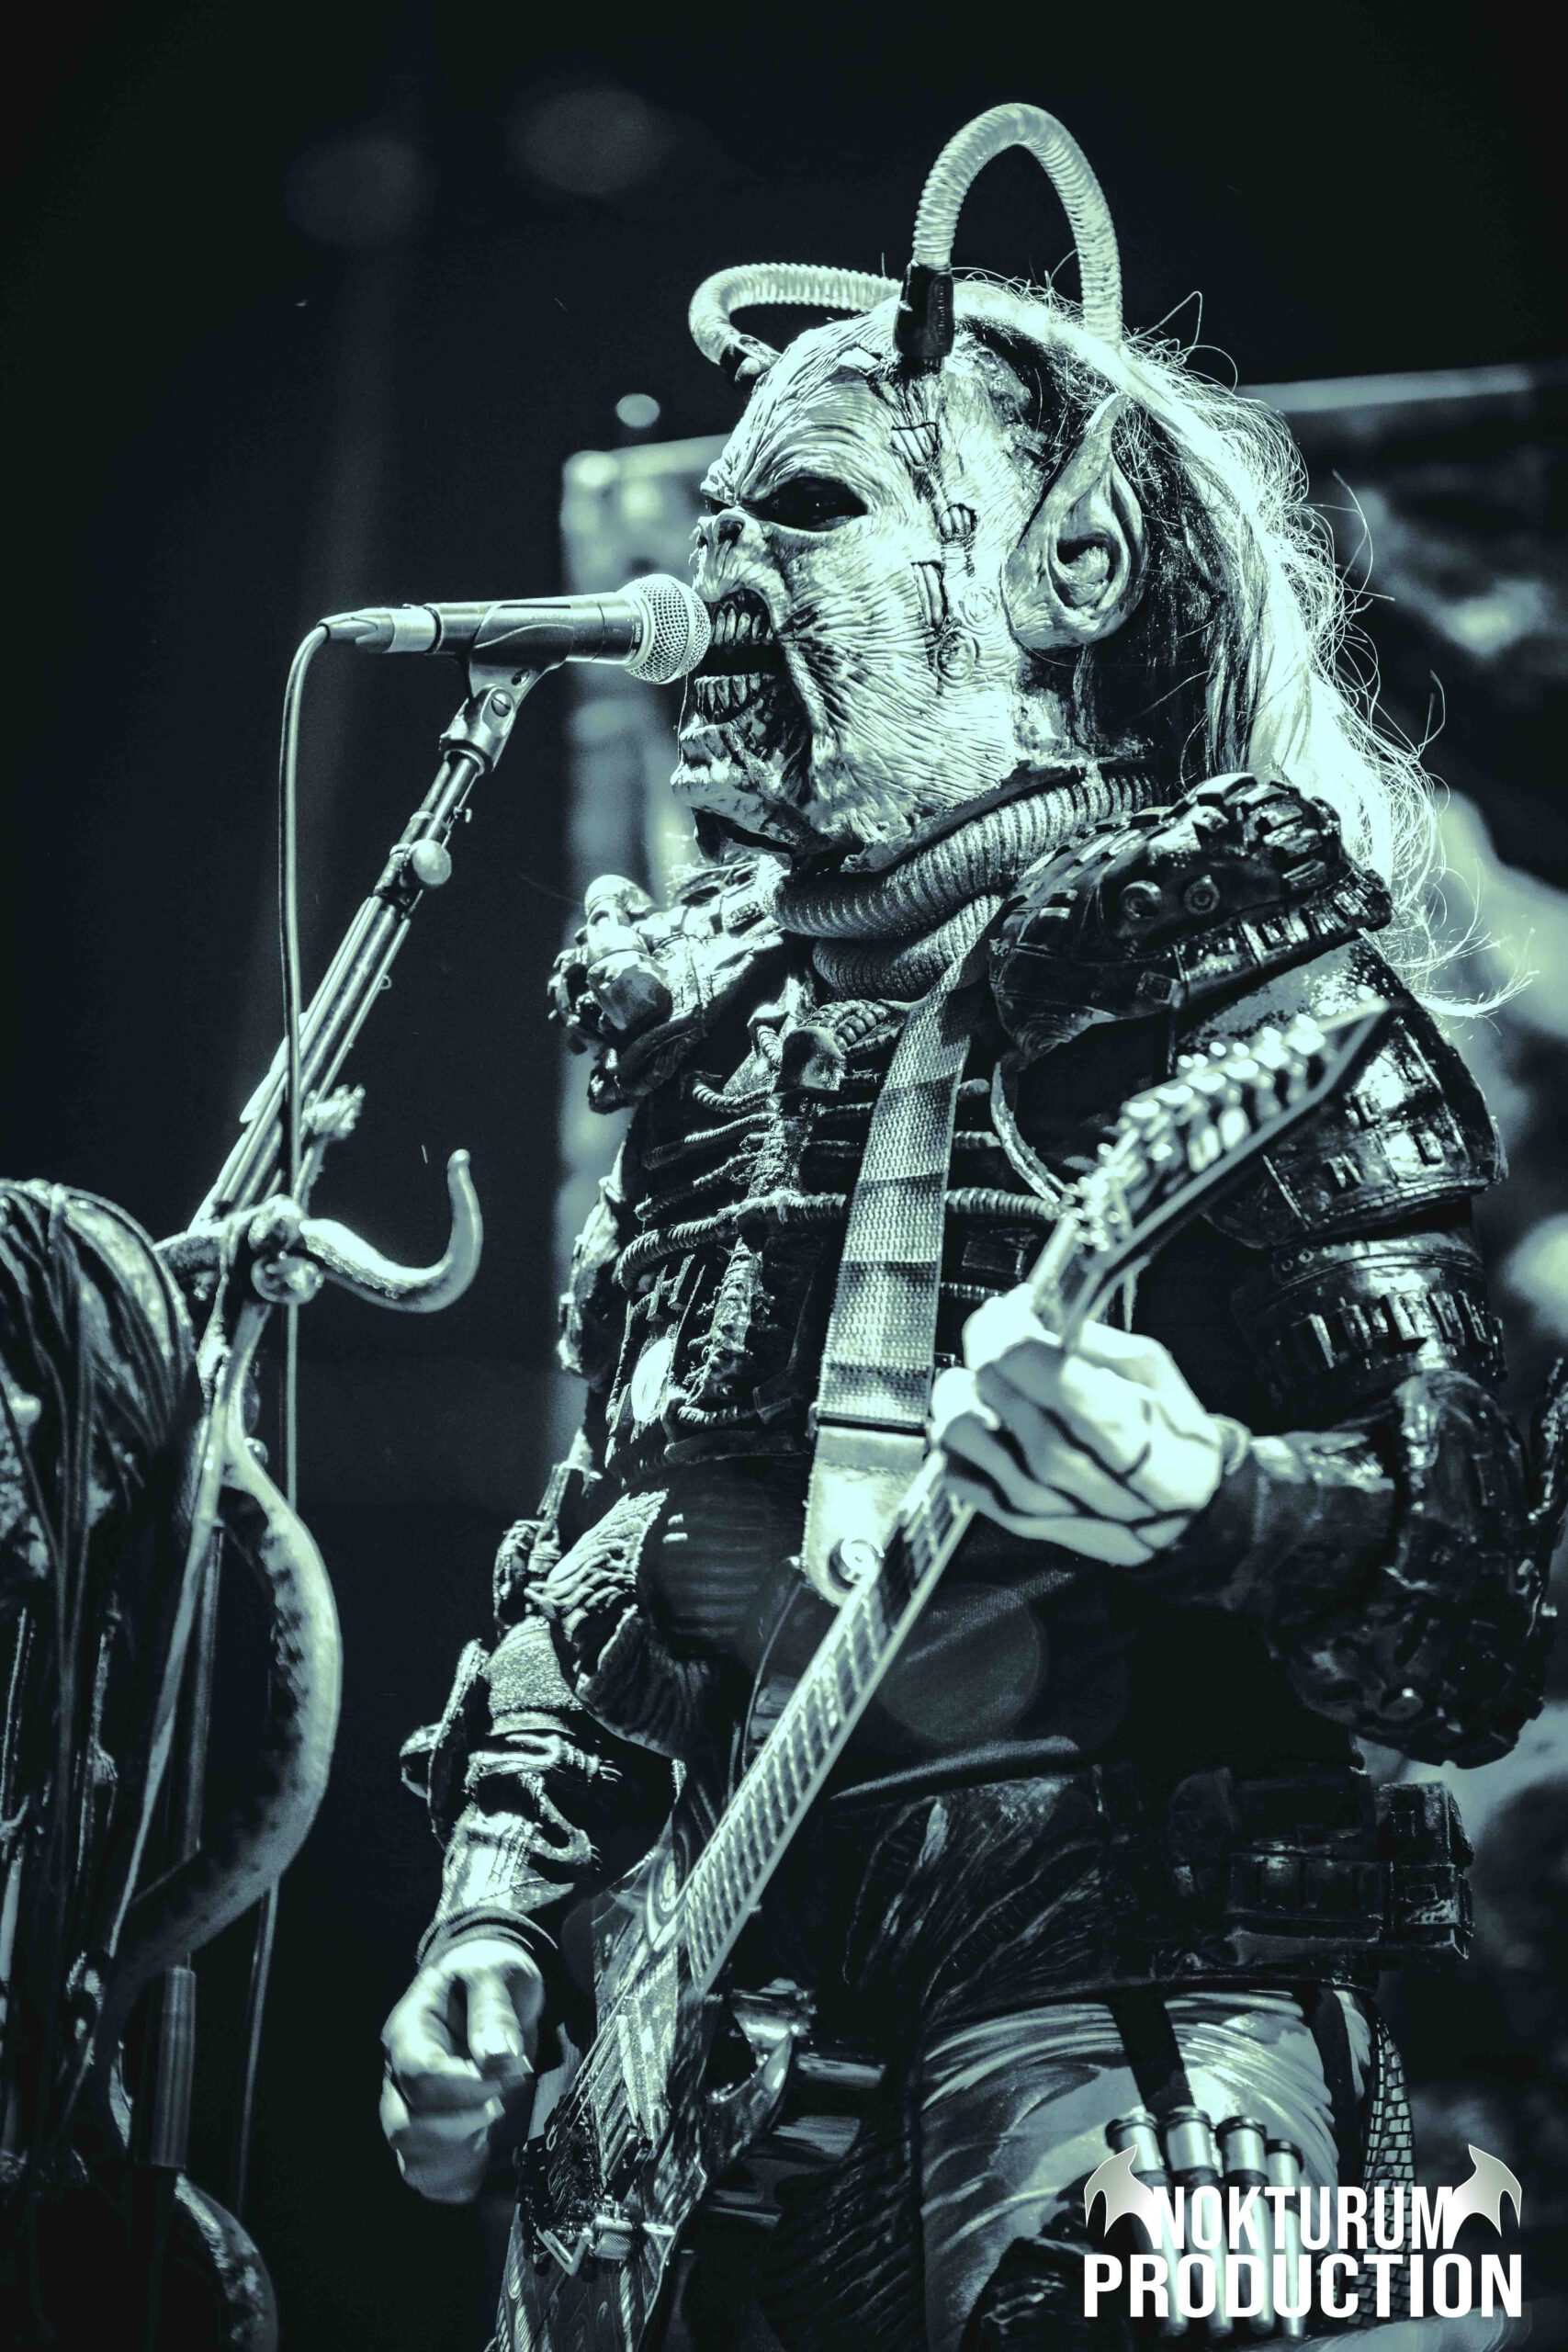 Lordi_22.04.2023 - Picture by nokturum_production (5)